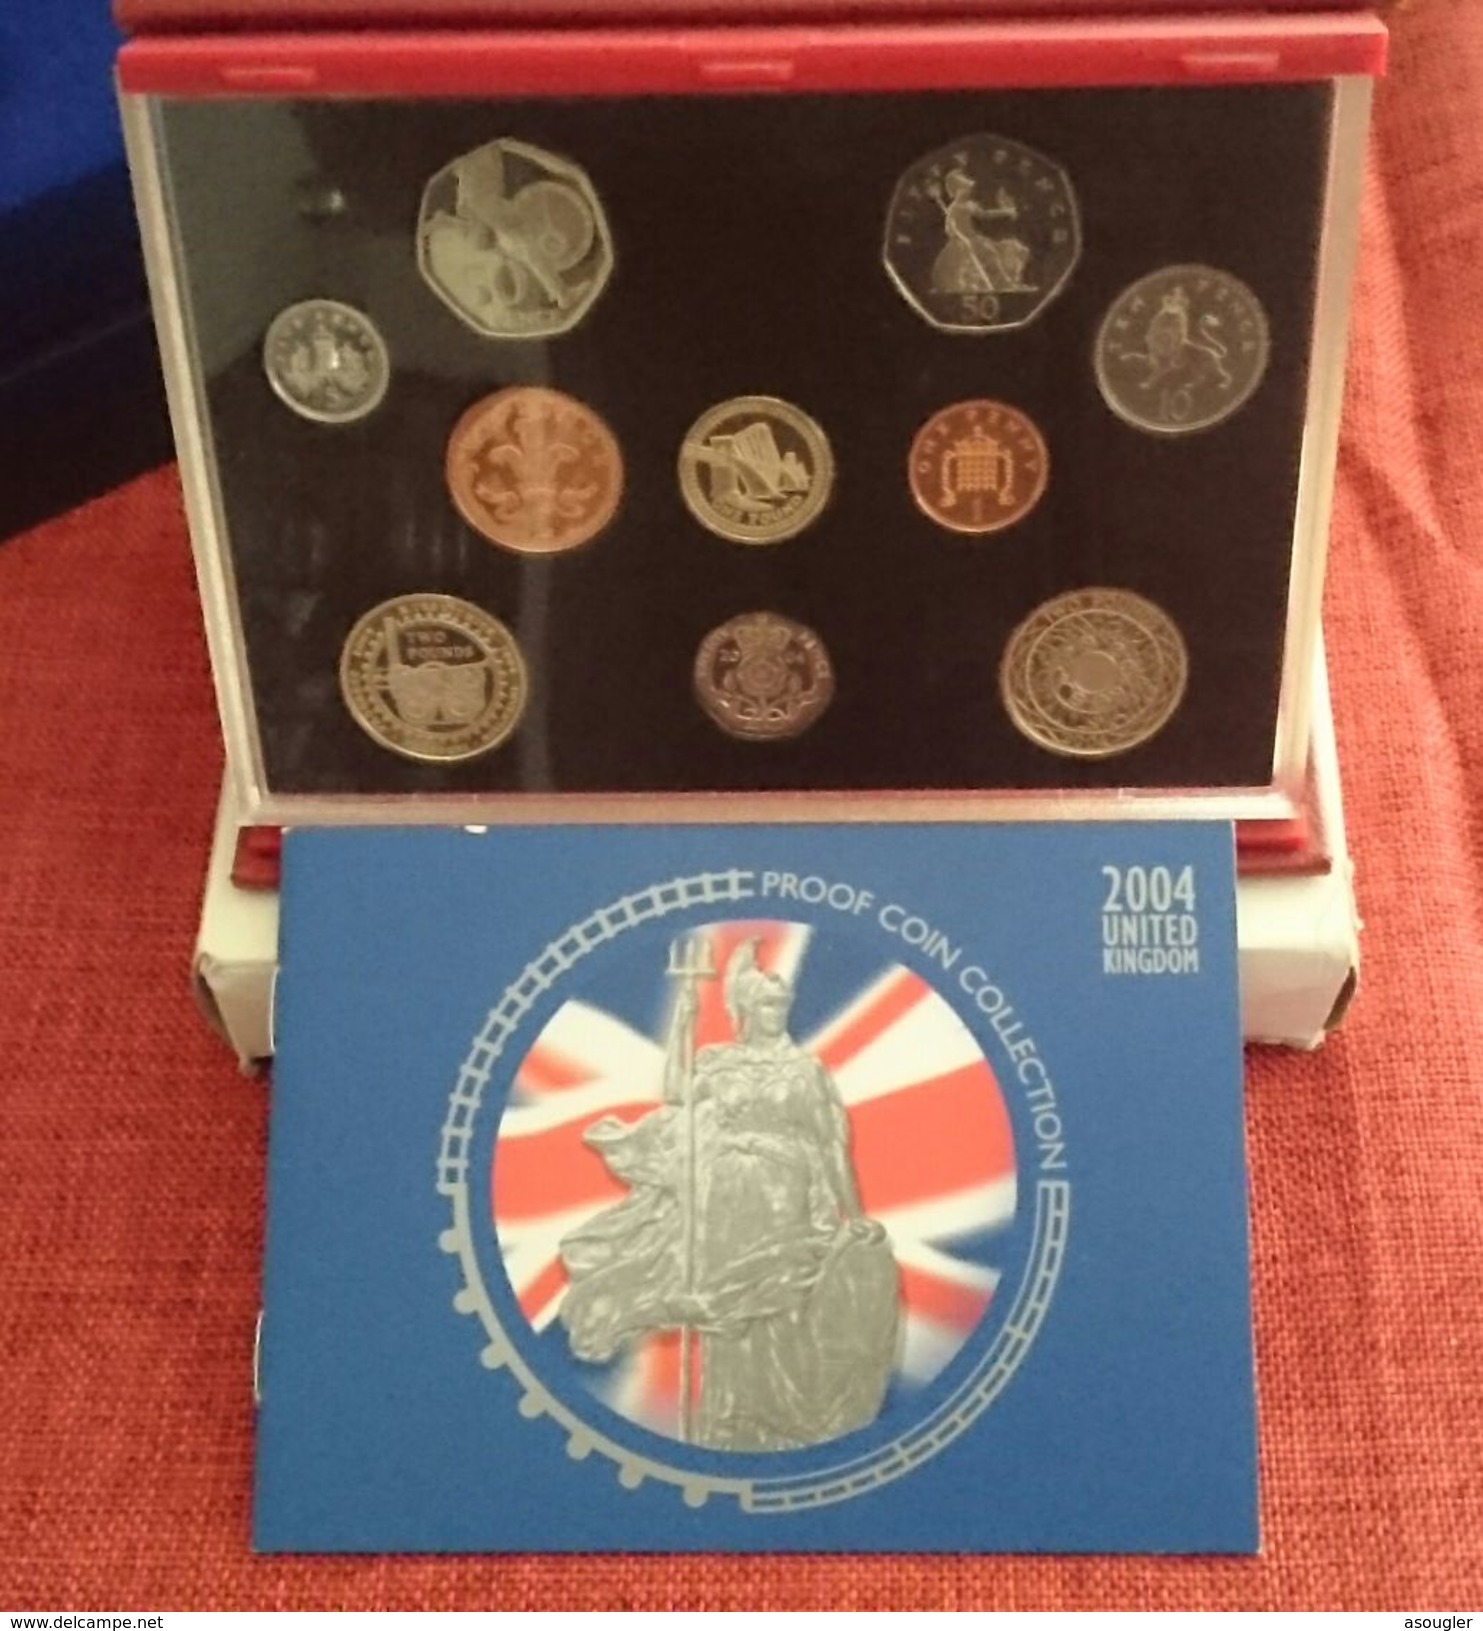 Great Britain United Kingdom 2004 Royal Mint UK Proof Coin Set (free Shipping Via Registered Air Mail) - Mint Sets & Proof Sets